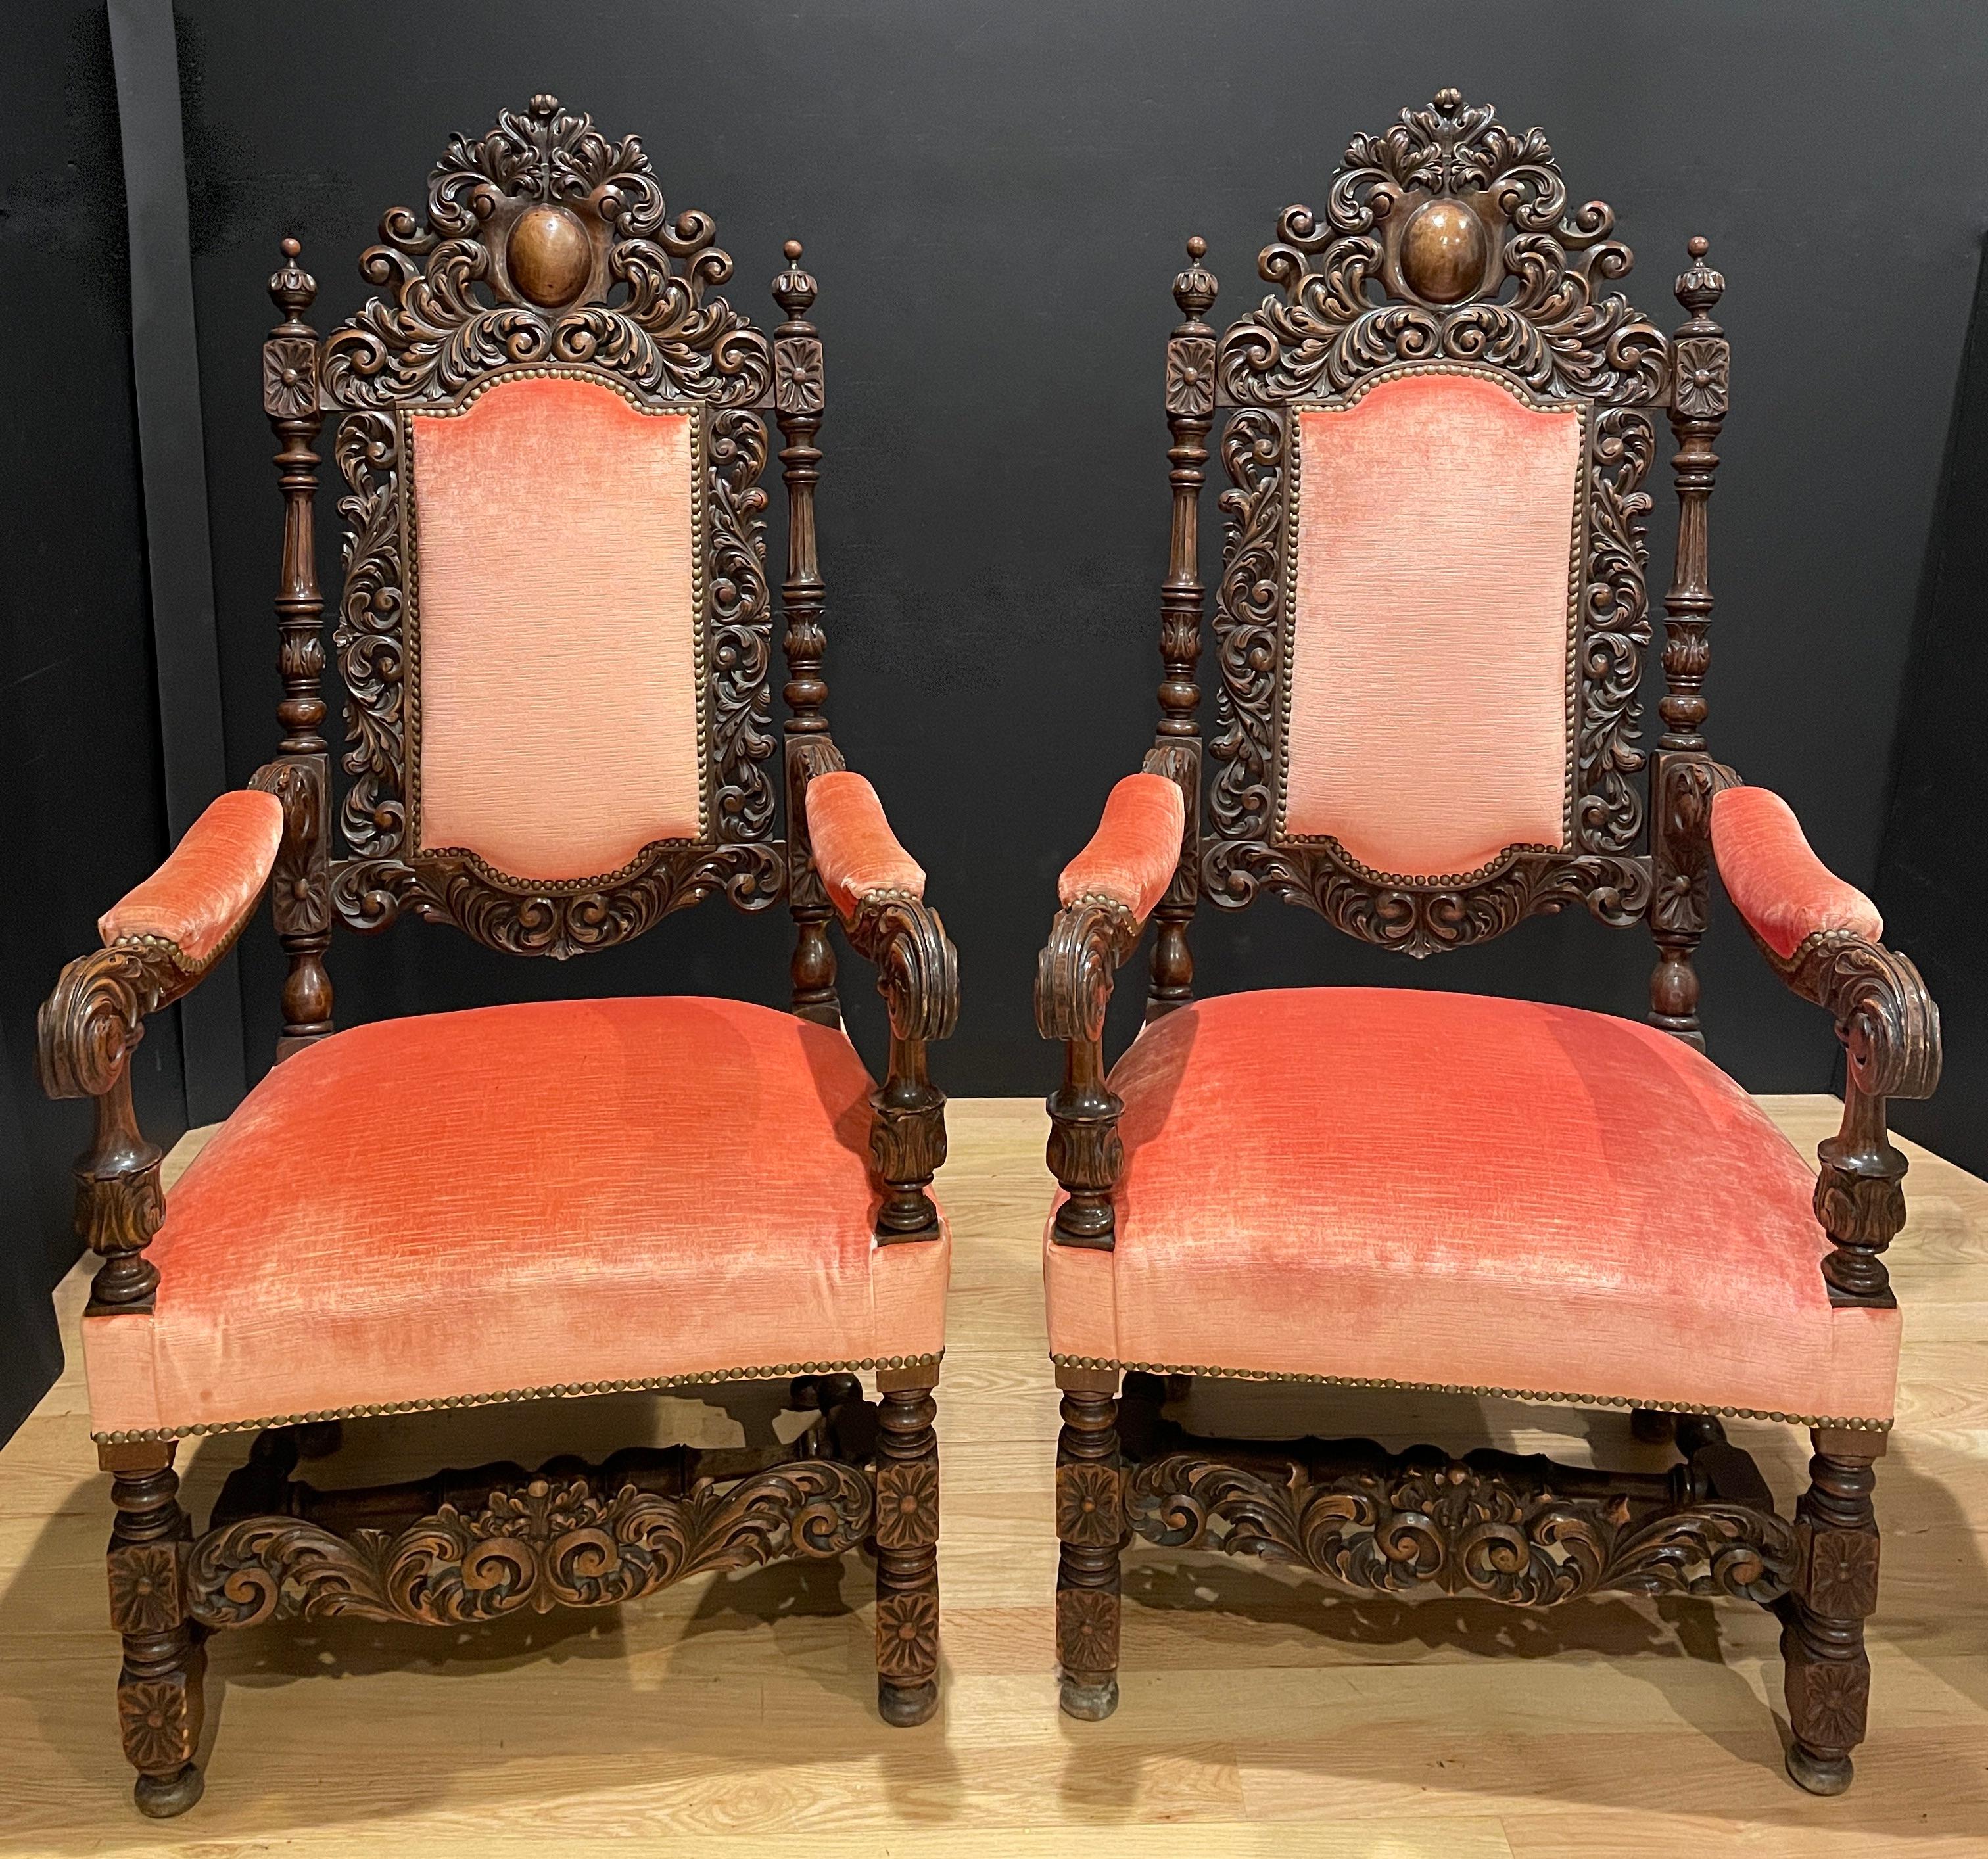 A fine quality pair of hand carved walnut Host and Hostess throne chairs. Upholstered in a coral tone velvet. Carving with a center cabochon form cartouche surrounded by floral scrolls and bottom carved apron.